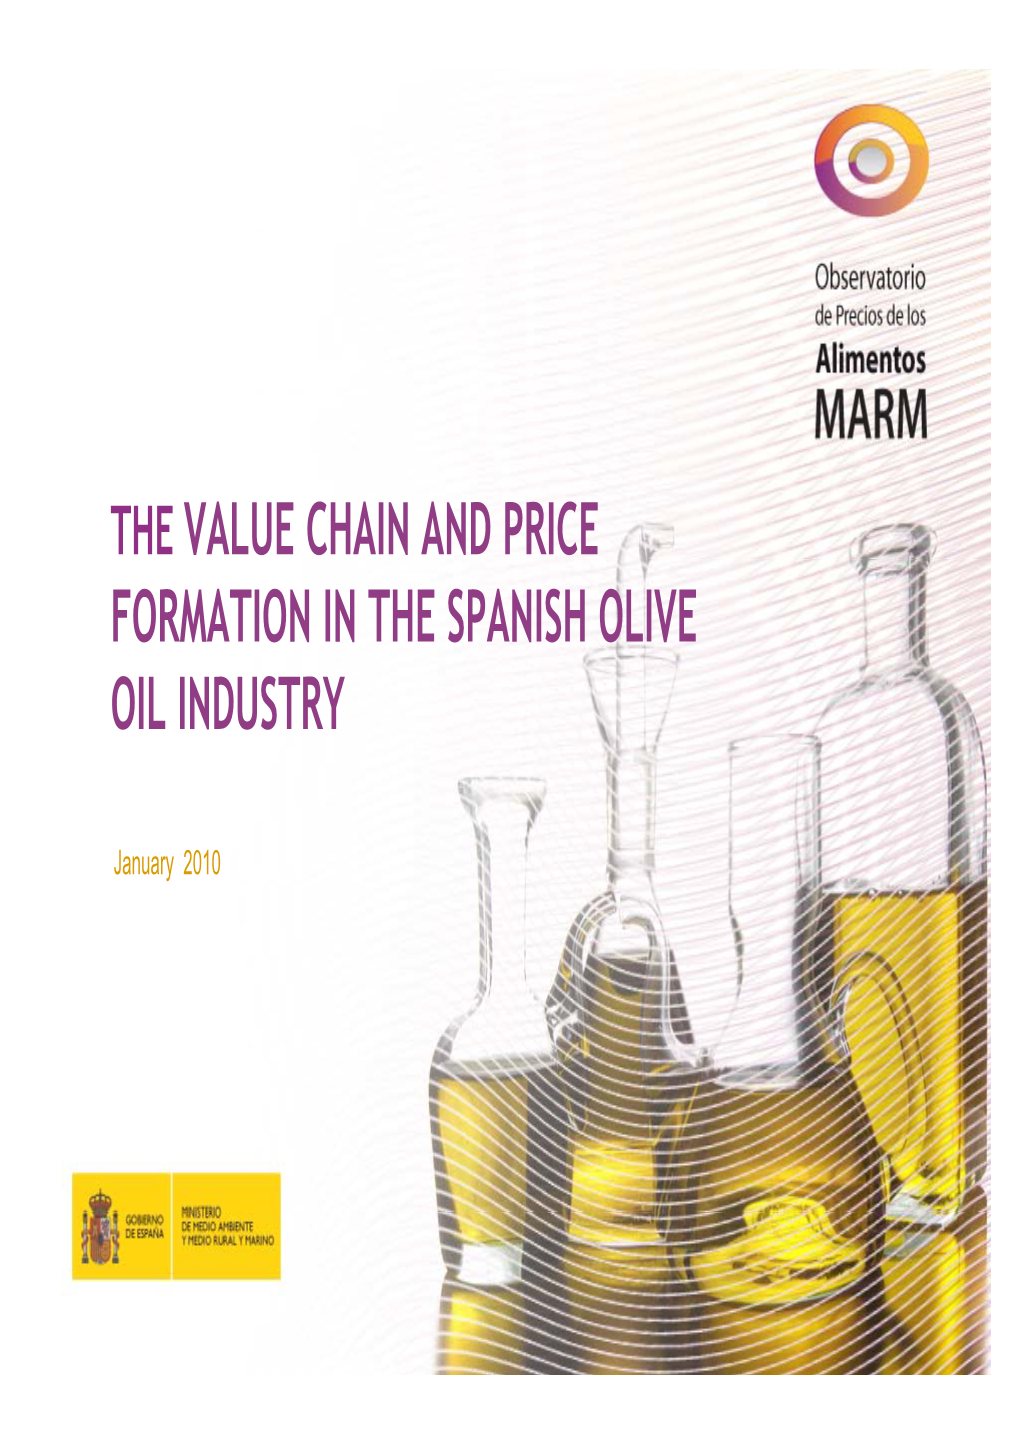 The Value Chain and Price Formation in the Spanish Olive Oil Industry